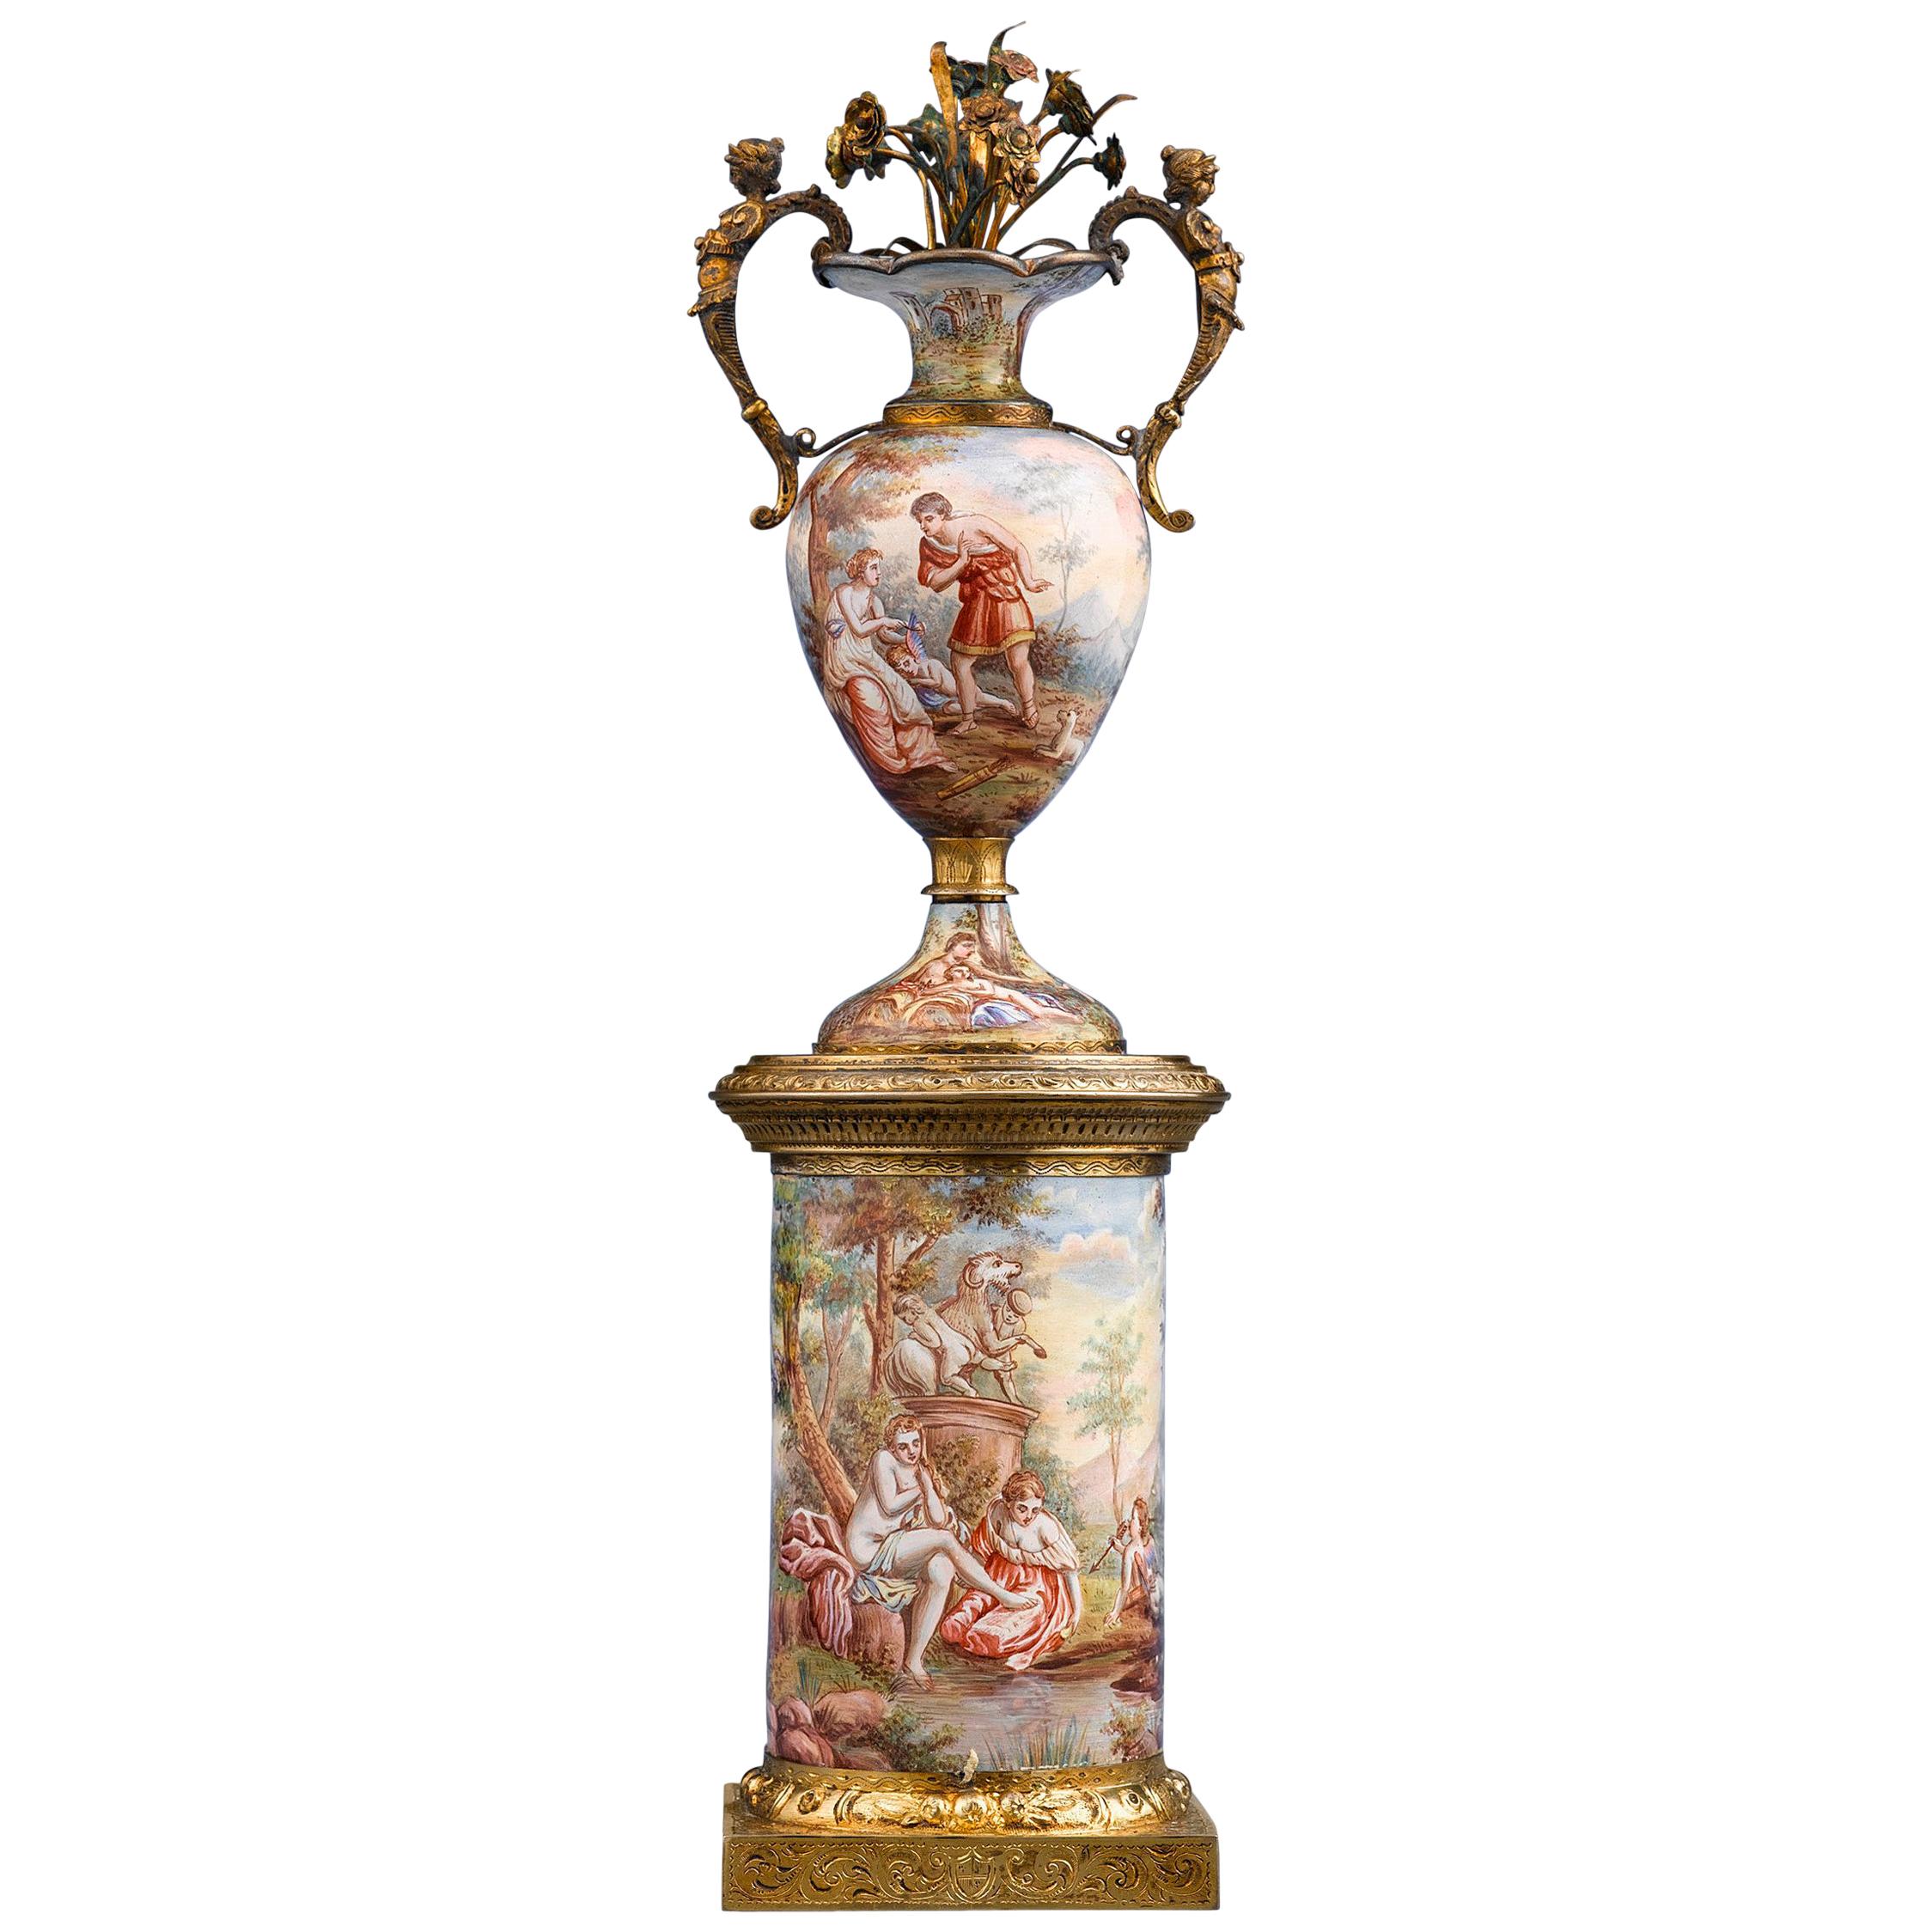 Viennese Silver-Gilt and Enamel Vase